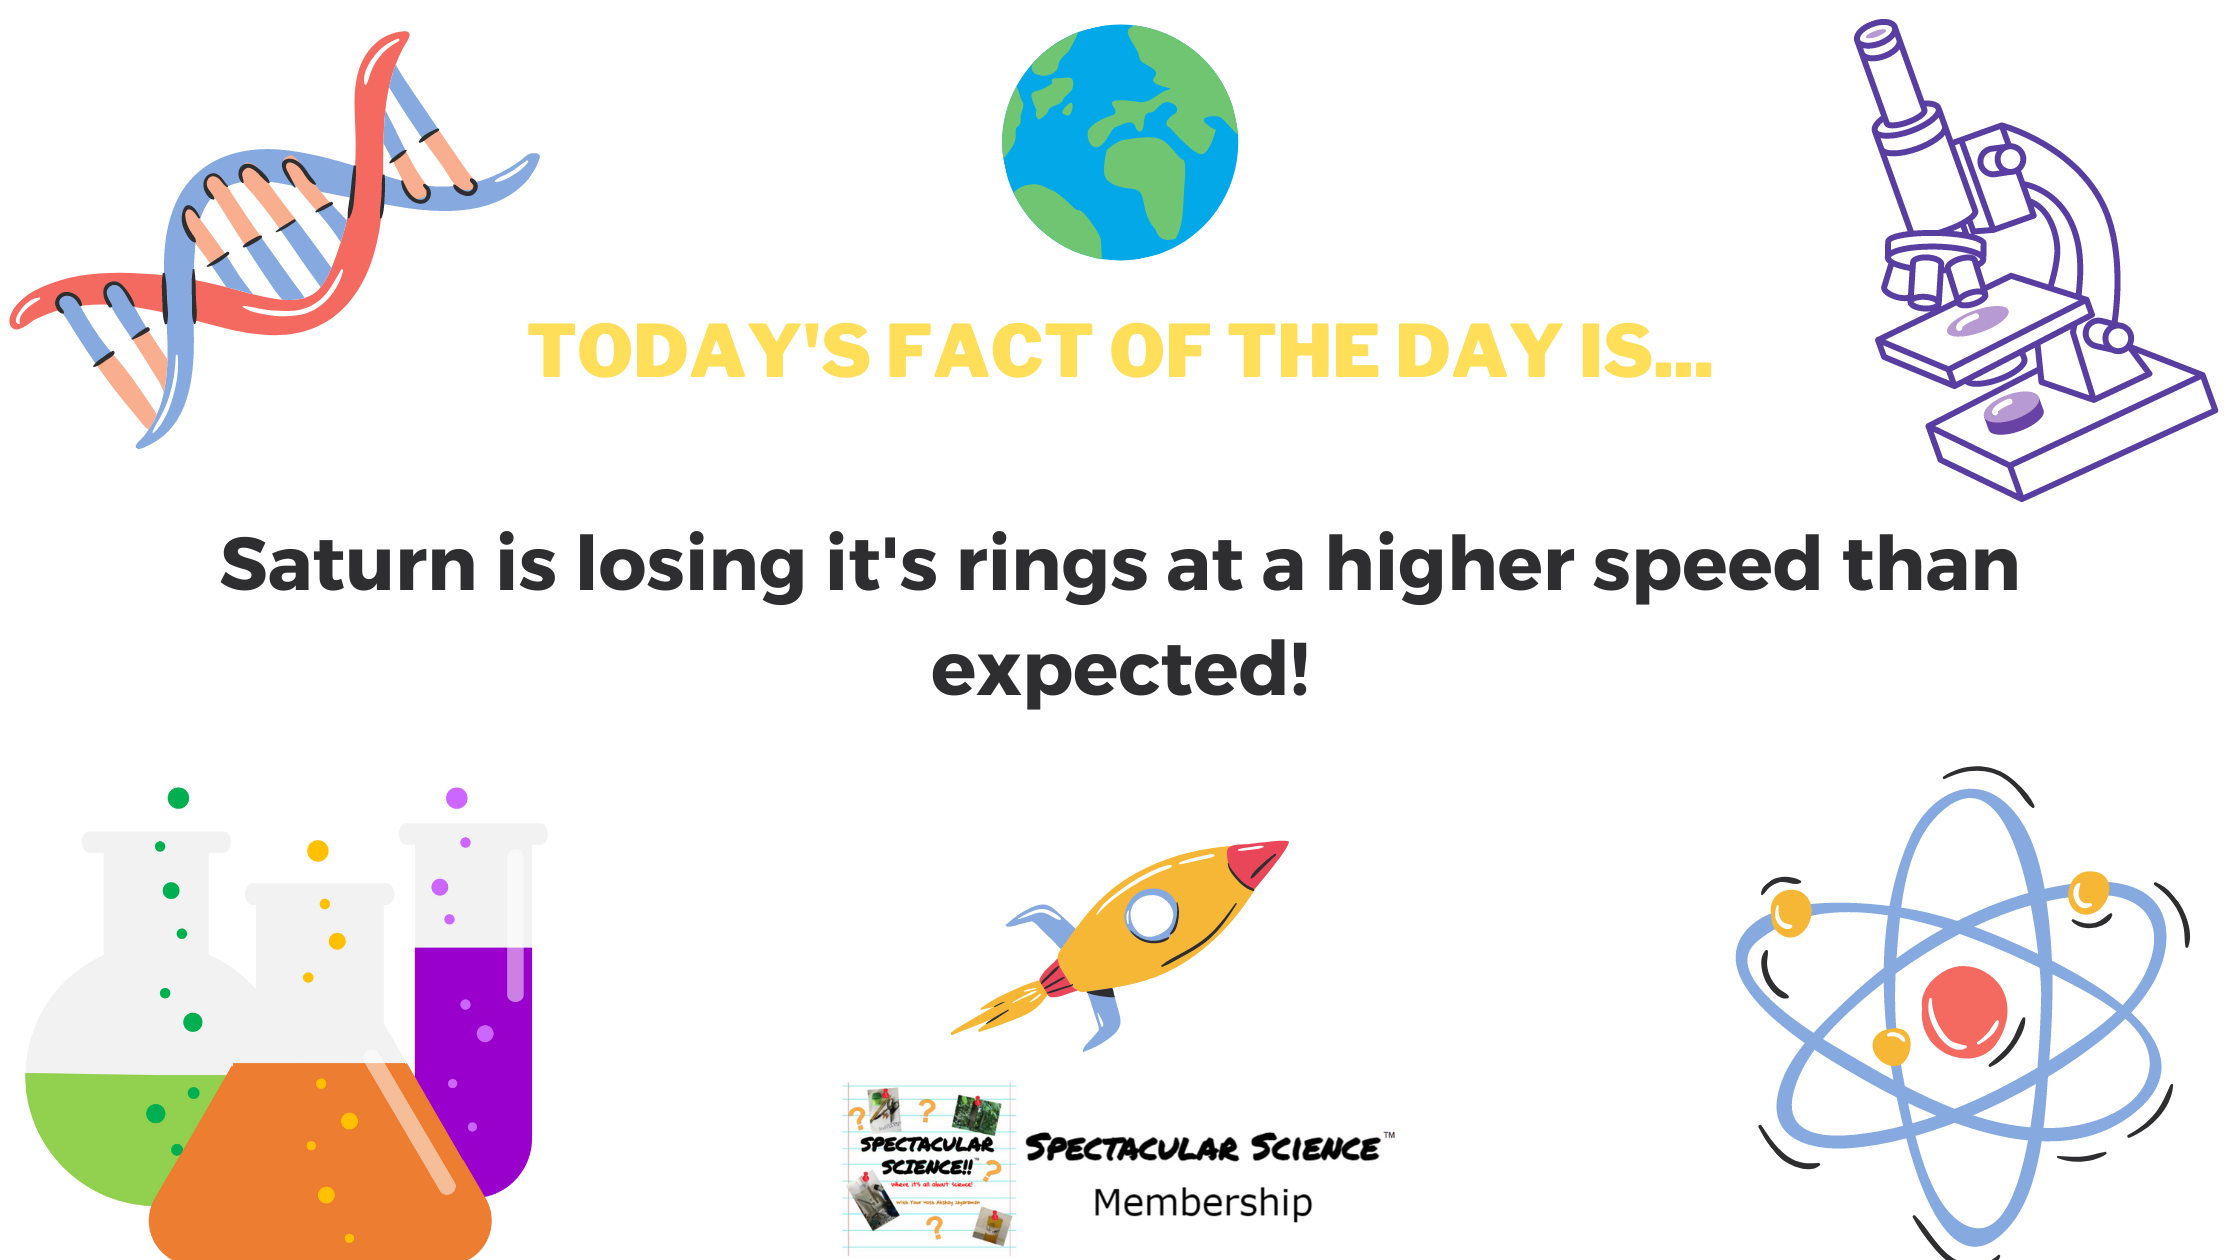 Fact of the Day Image Apr. 5th